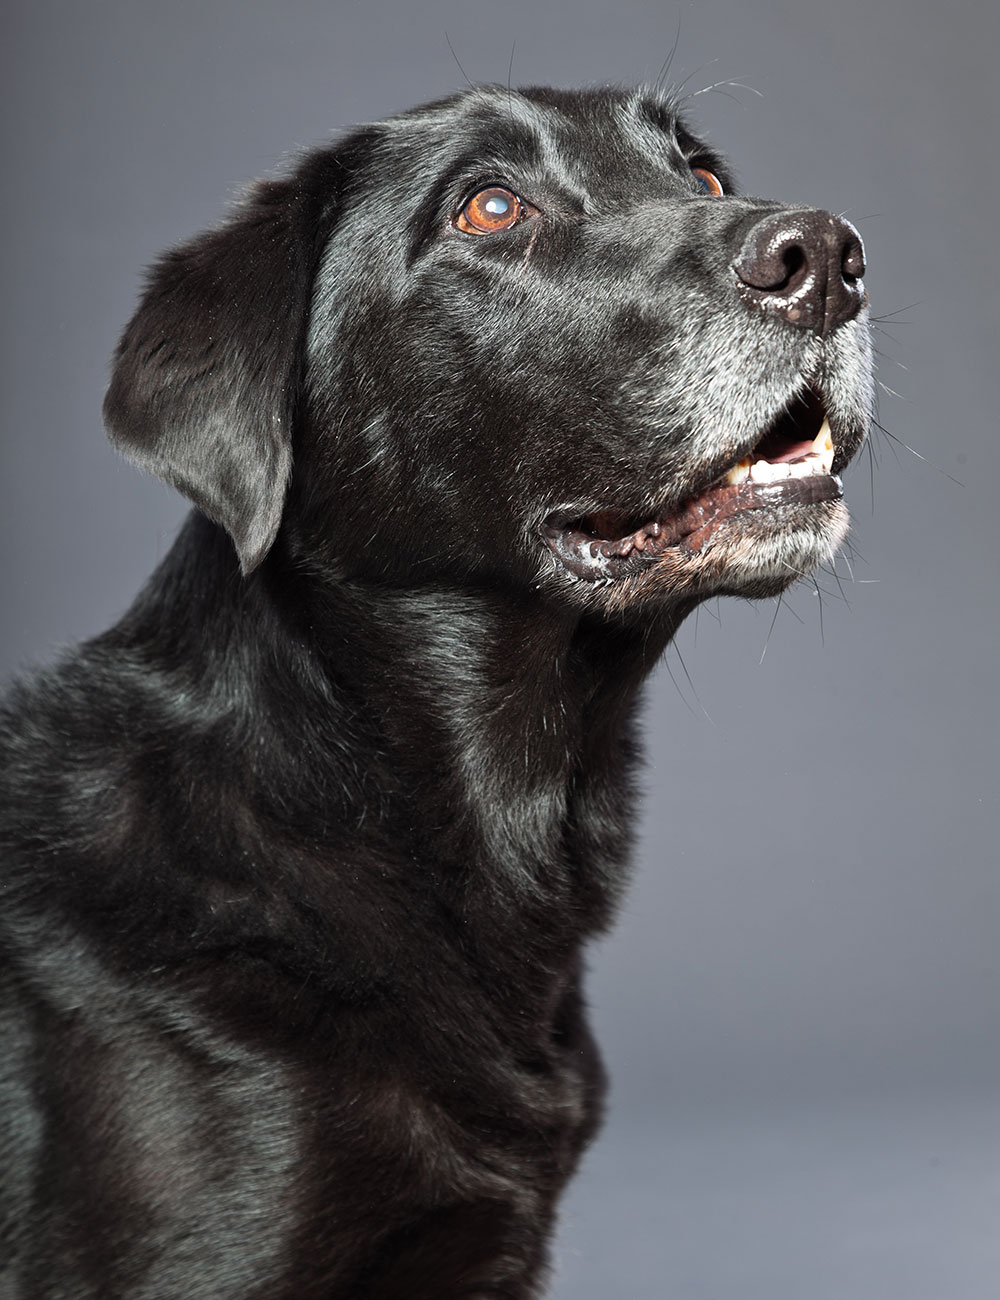 Common Conditions Affecting Older Pets